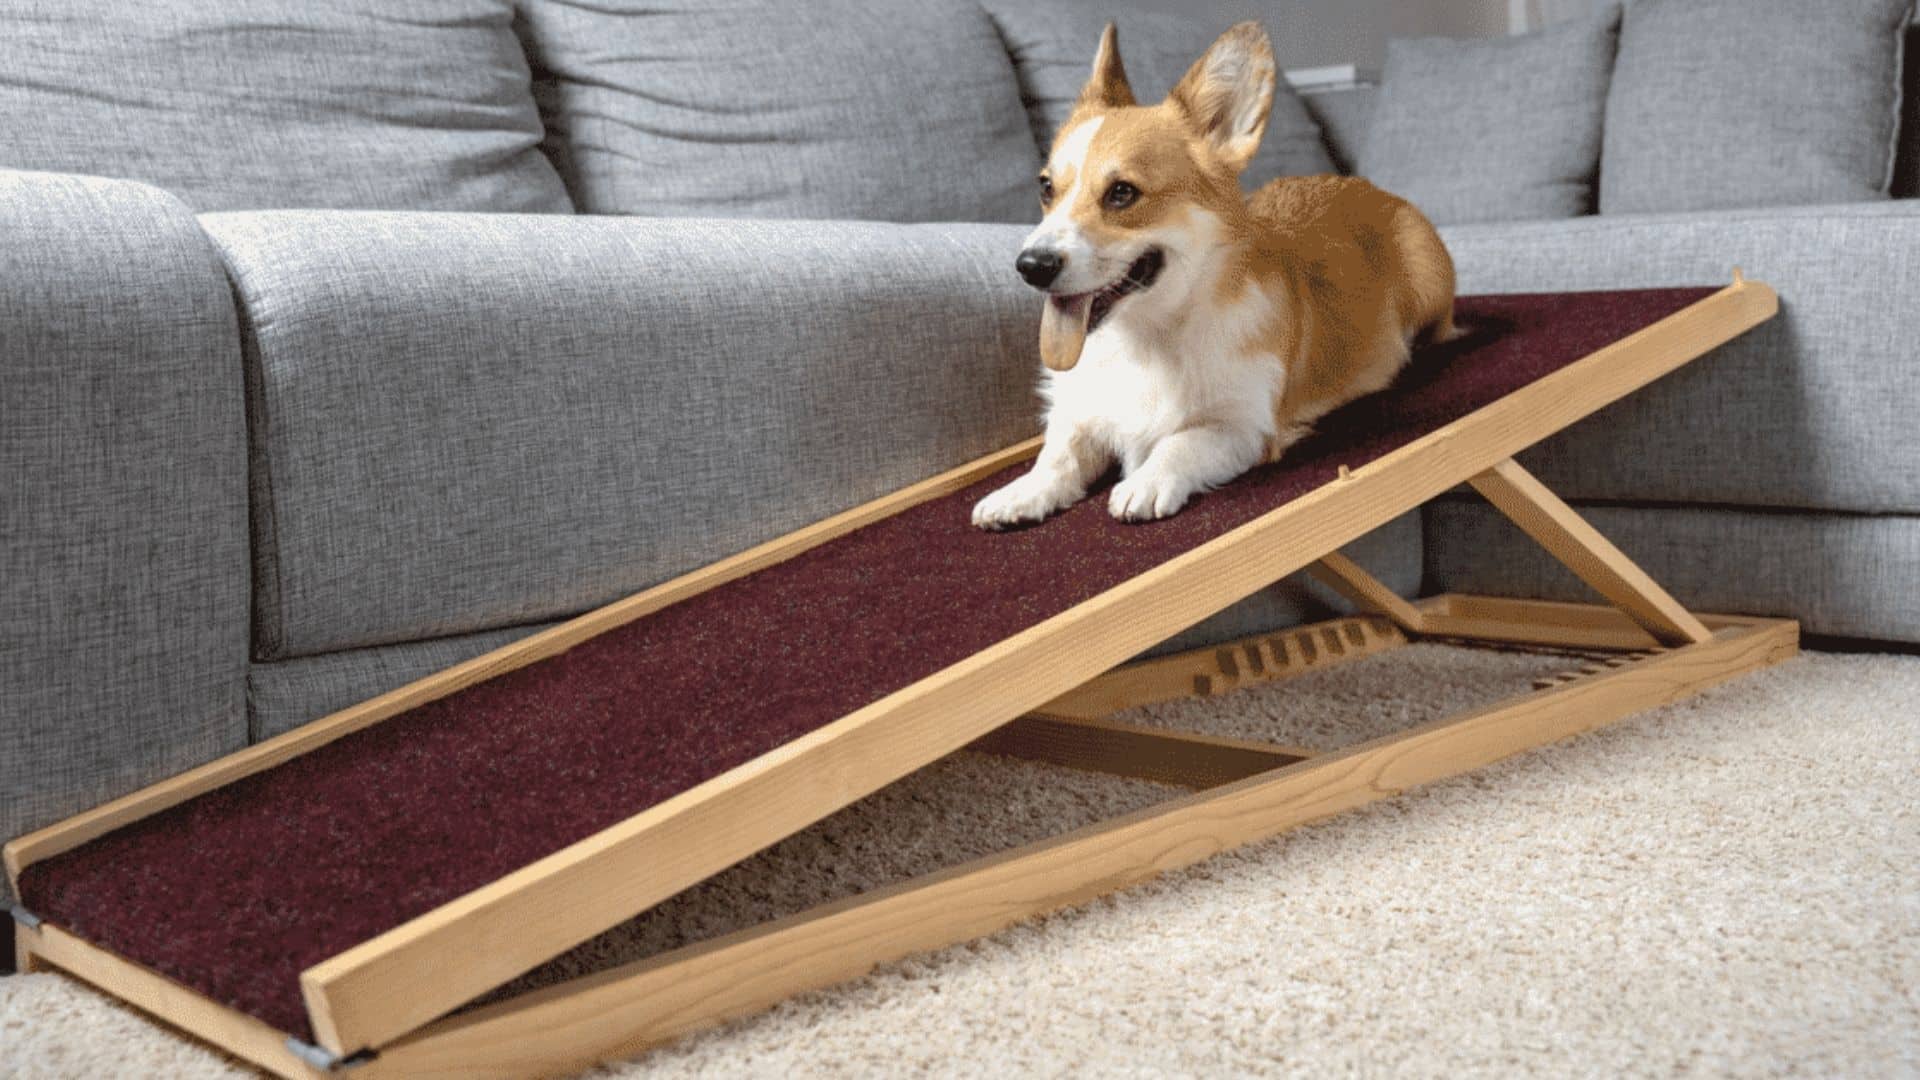 Pet Ramp for All Dogs and Cats Good Couch Access for Dogs and Cats-Support up to 60lb,Non-Slip Carpet Surface,Great for Older Animals with Different Adjustable Heights TOPQSC Durable Dog Ramps